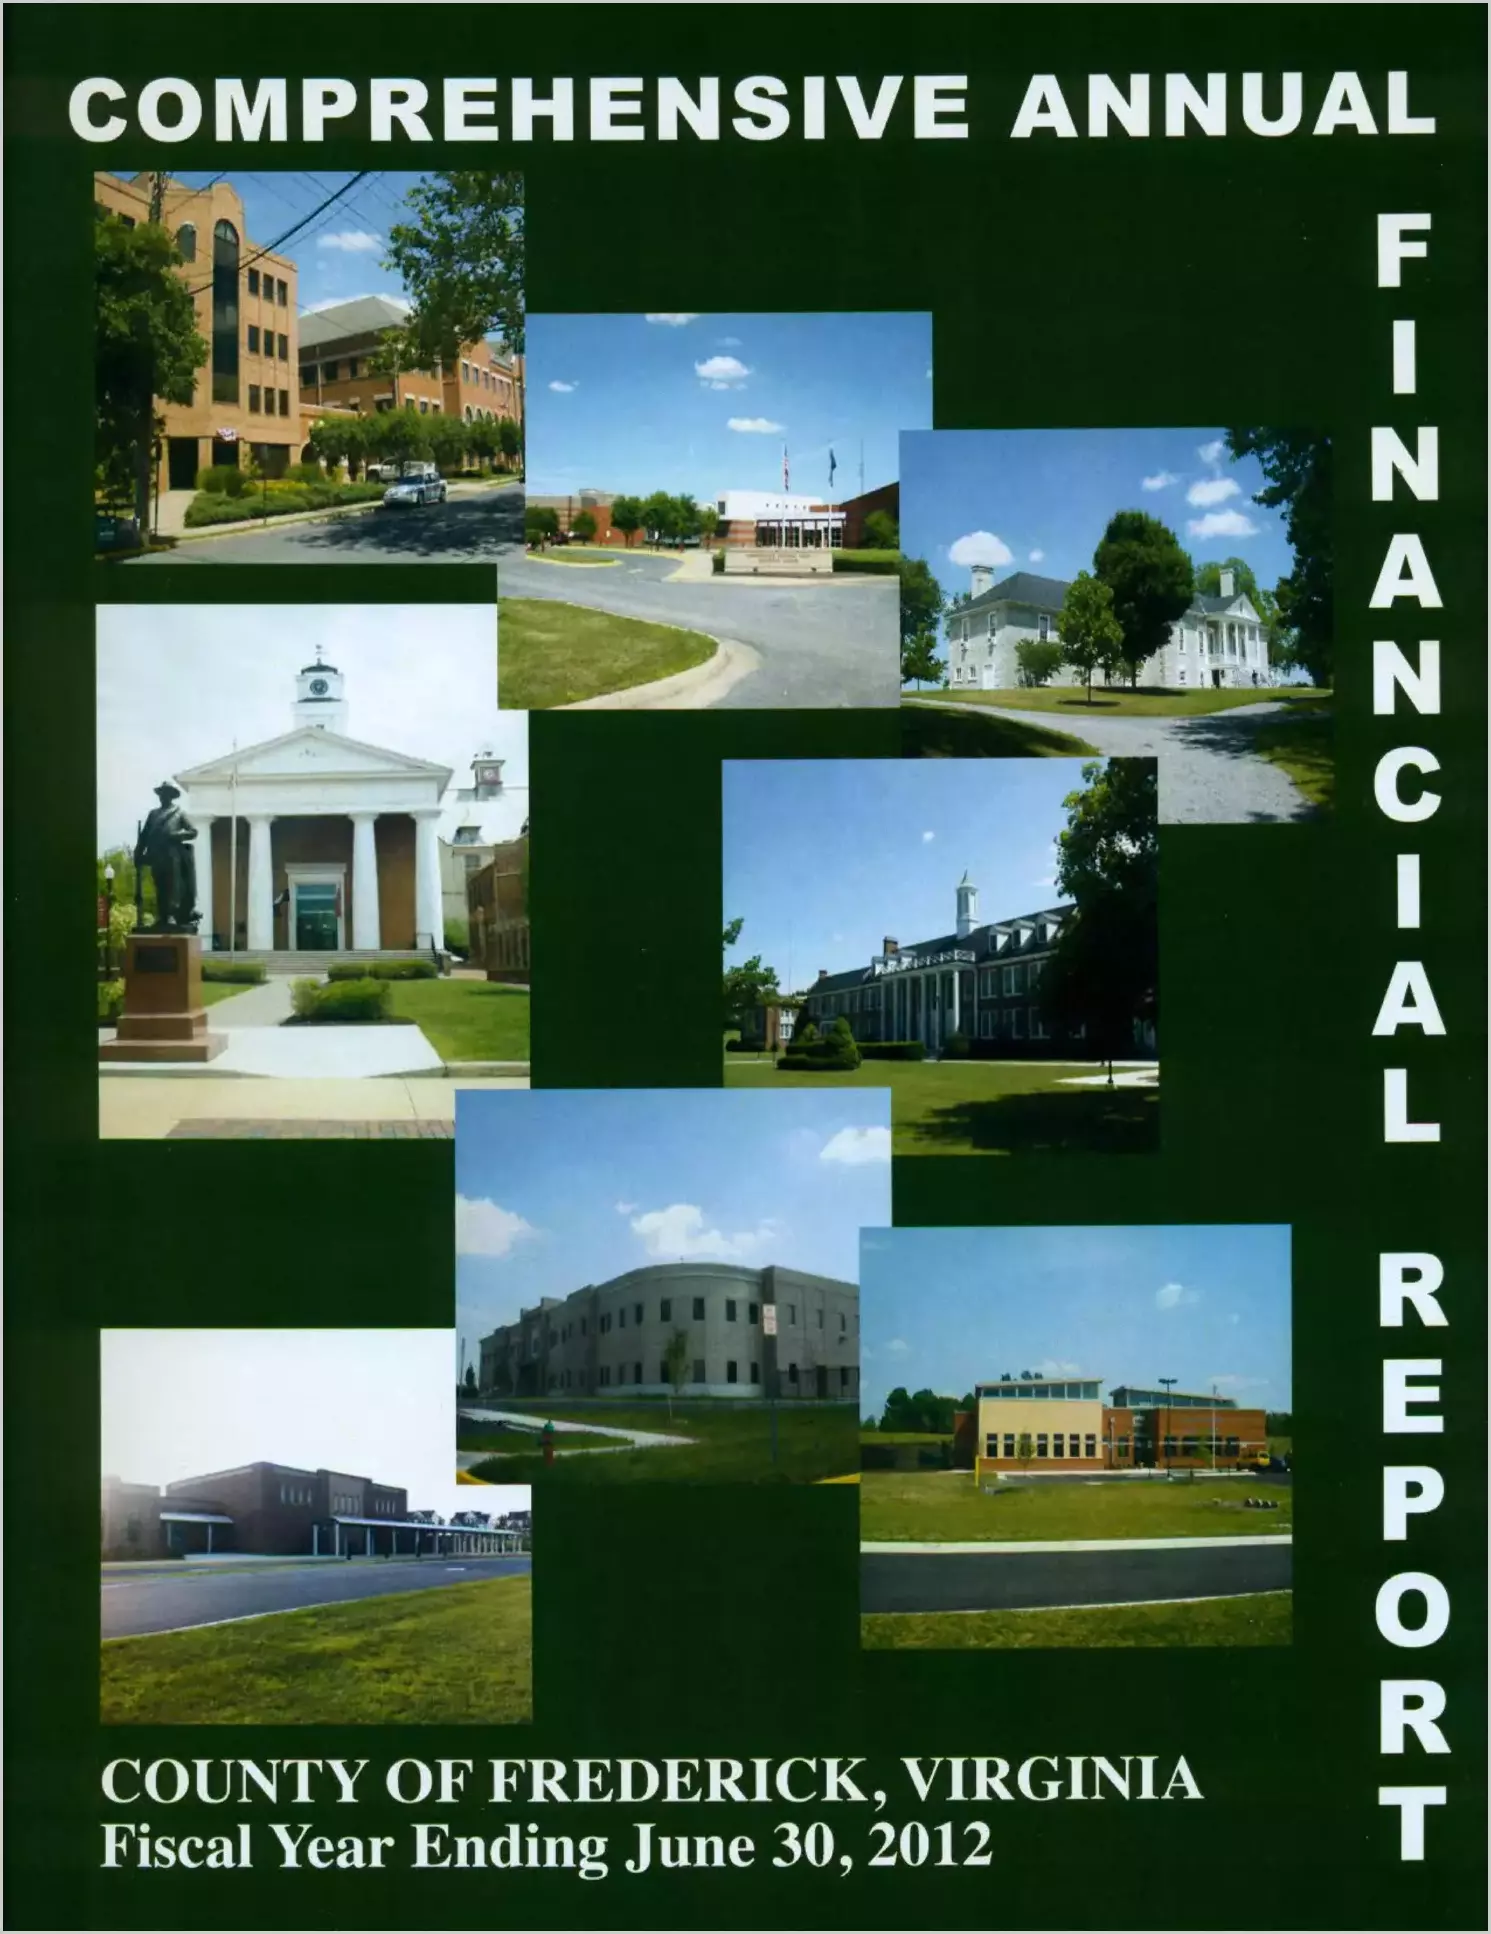 2012 Annual Financial Report for County of Frederick